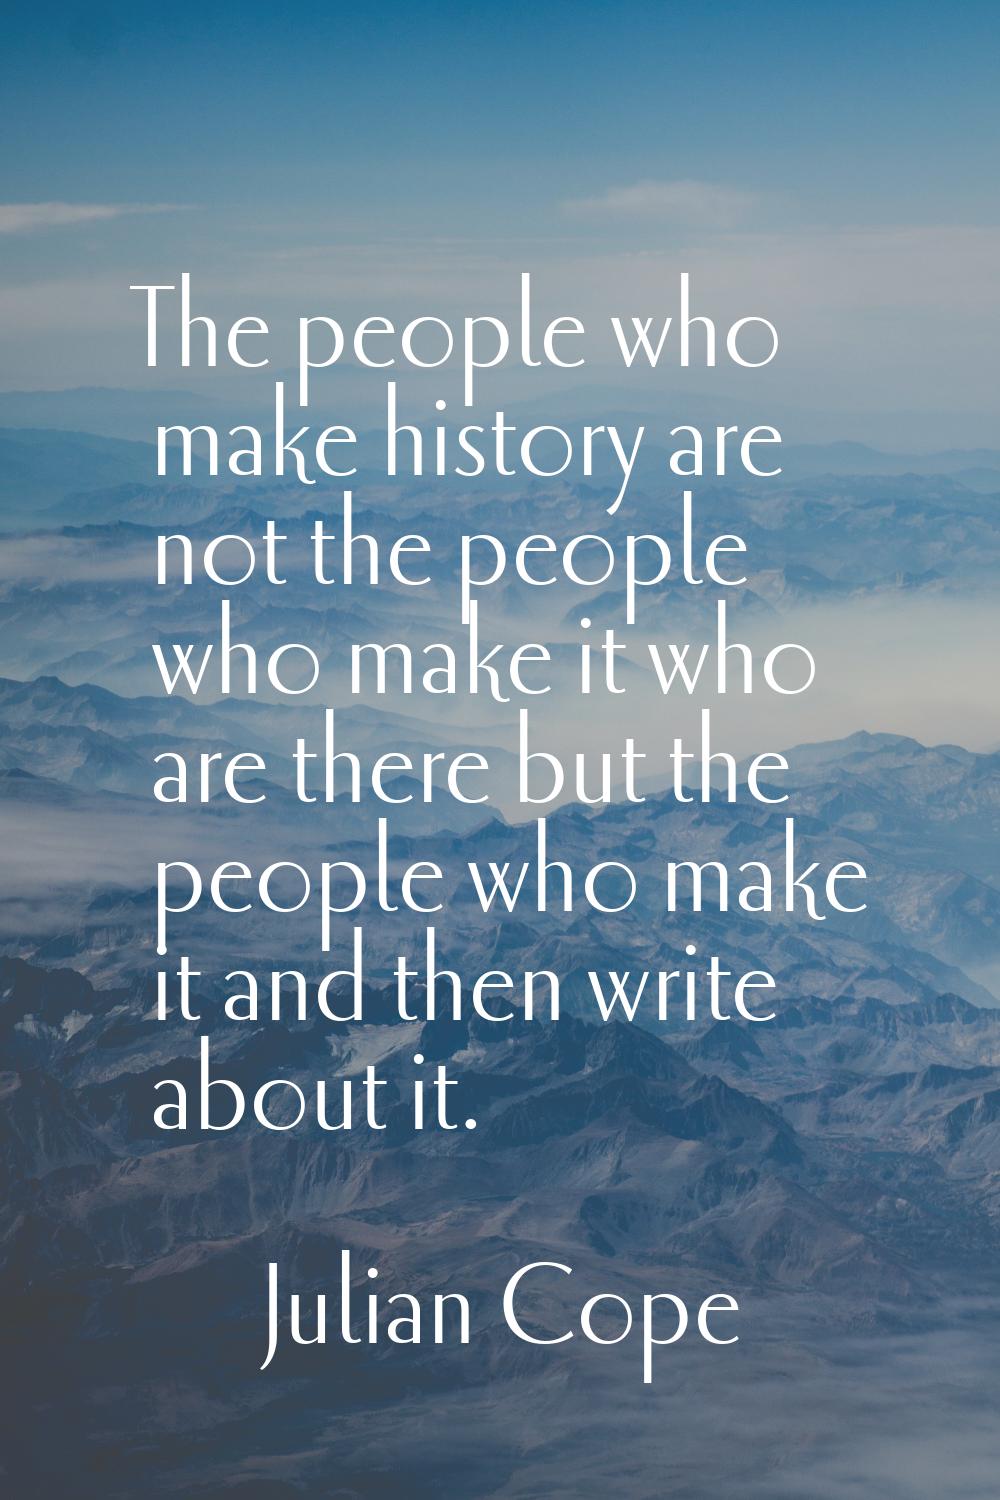 The people who make history are not the people who make it who are there but the people who make it